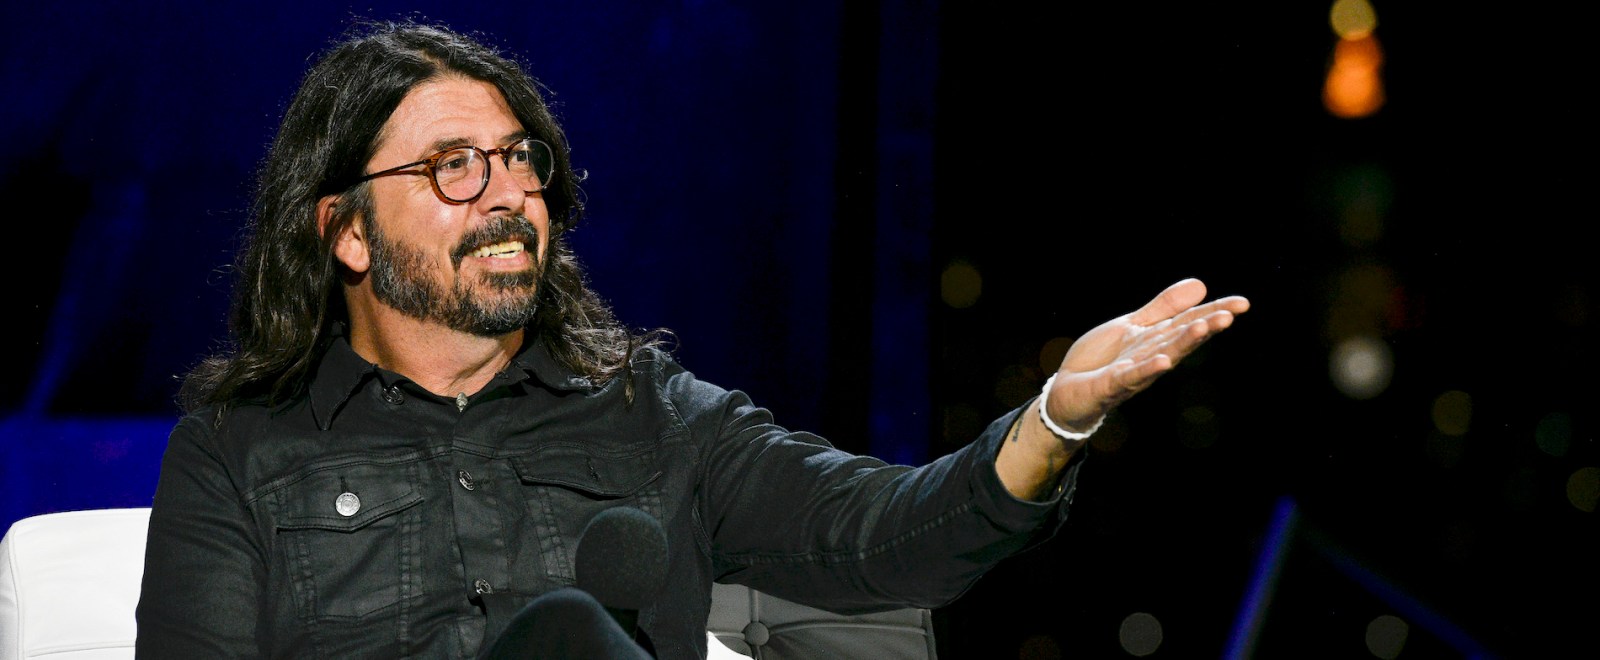 dave-grohl-foo-fighters-getty-full.jpg